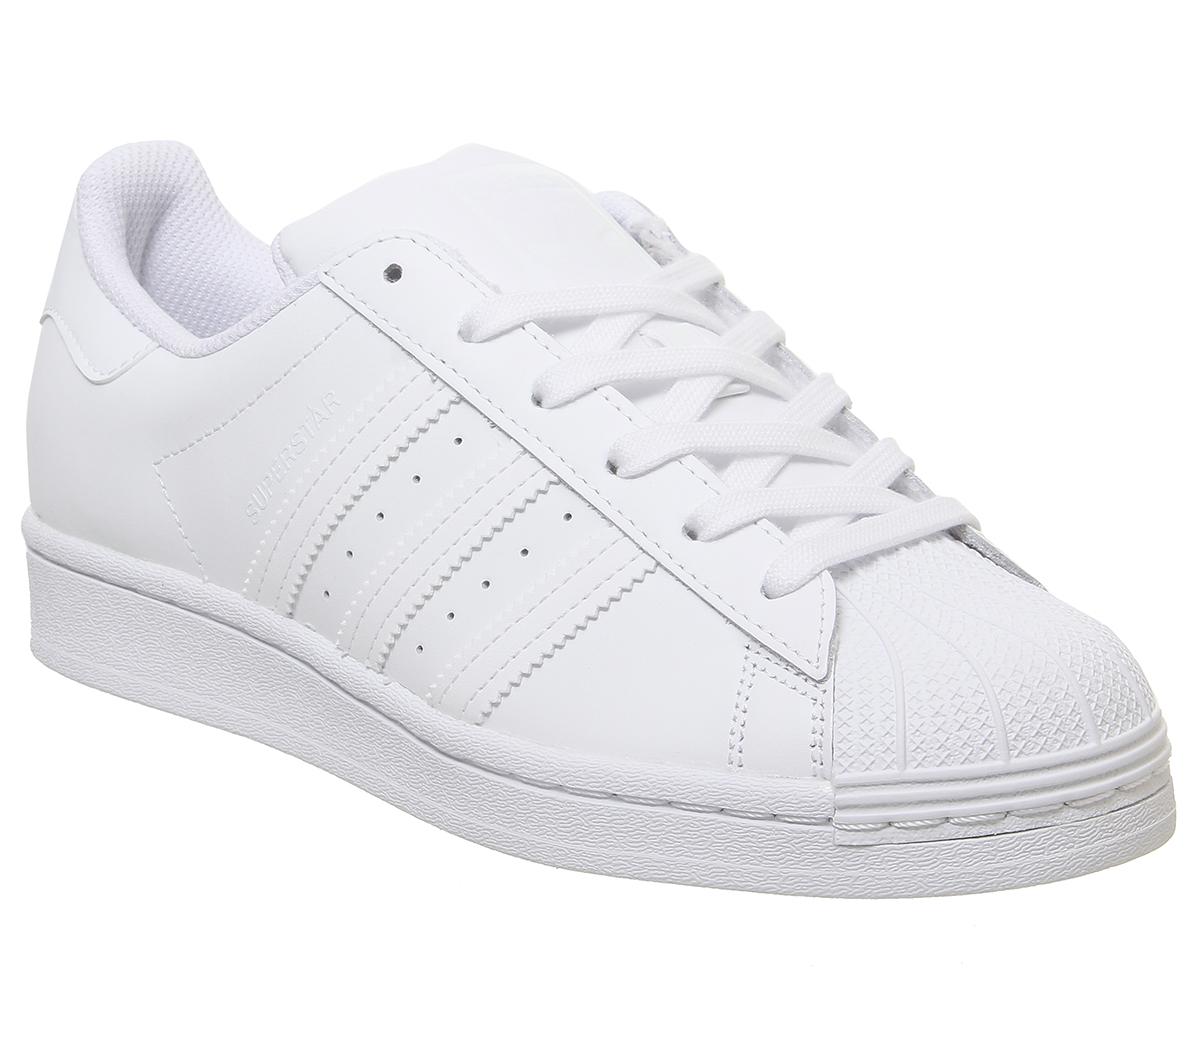 adidas Superstar Gs Trainers White - Hers trainers